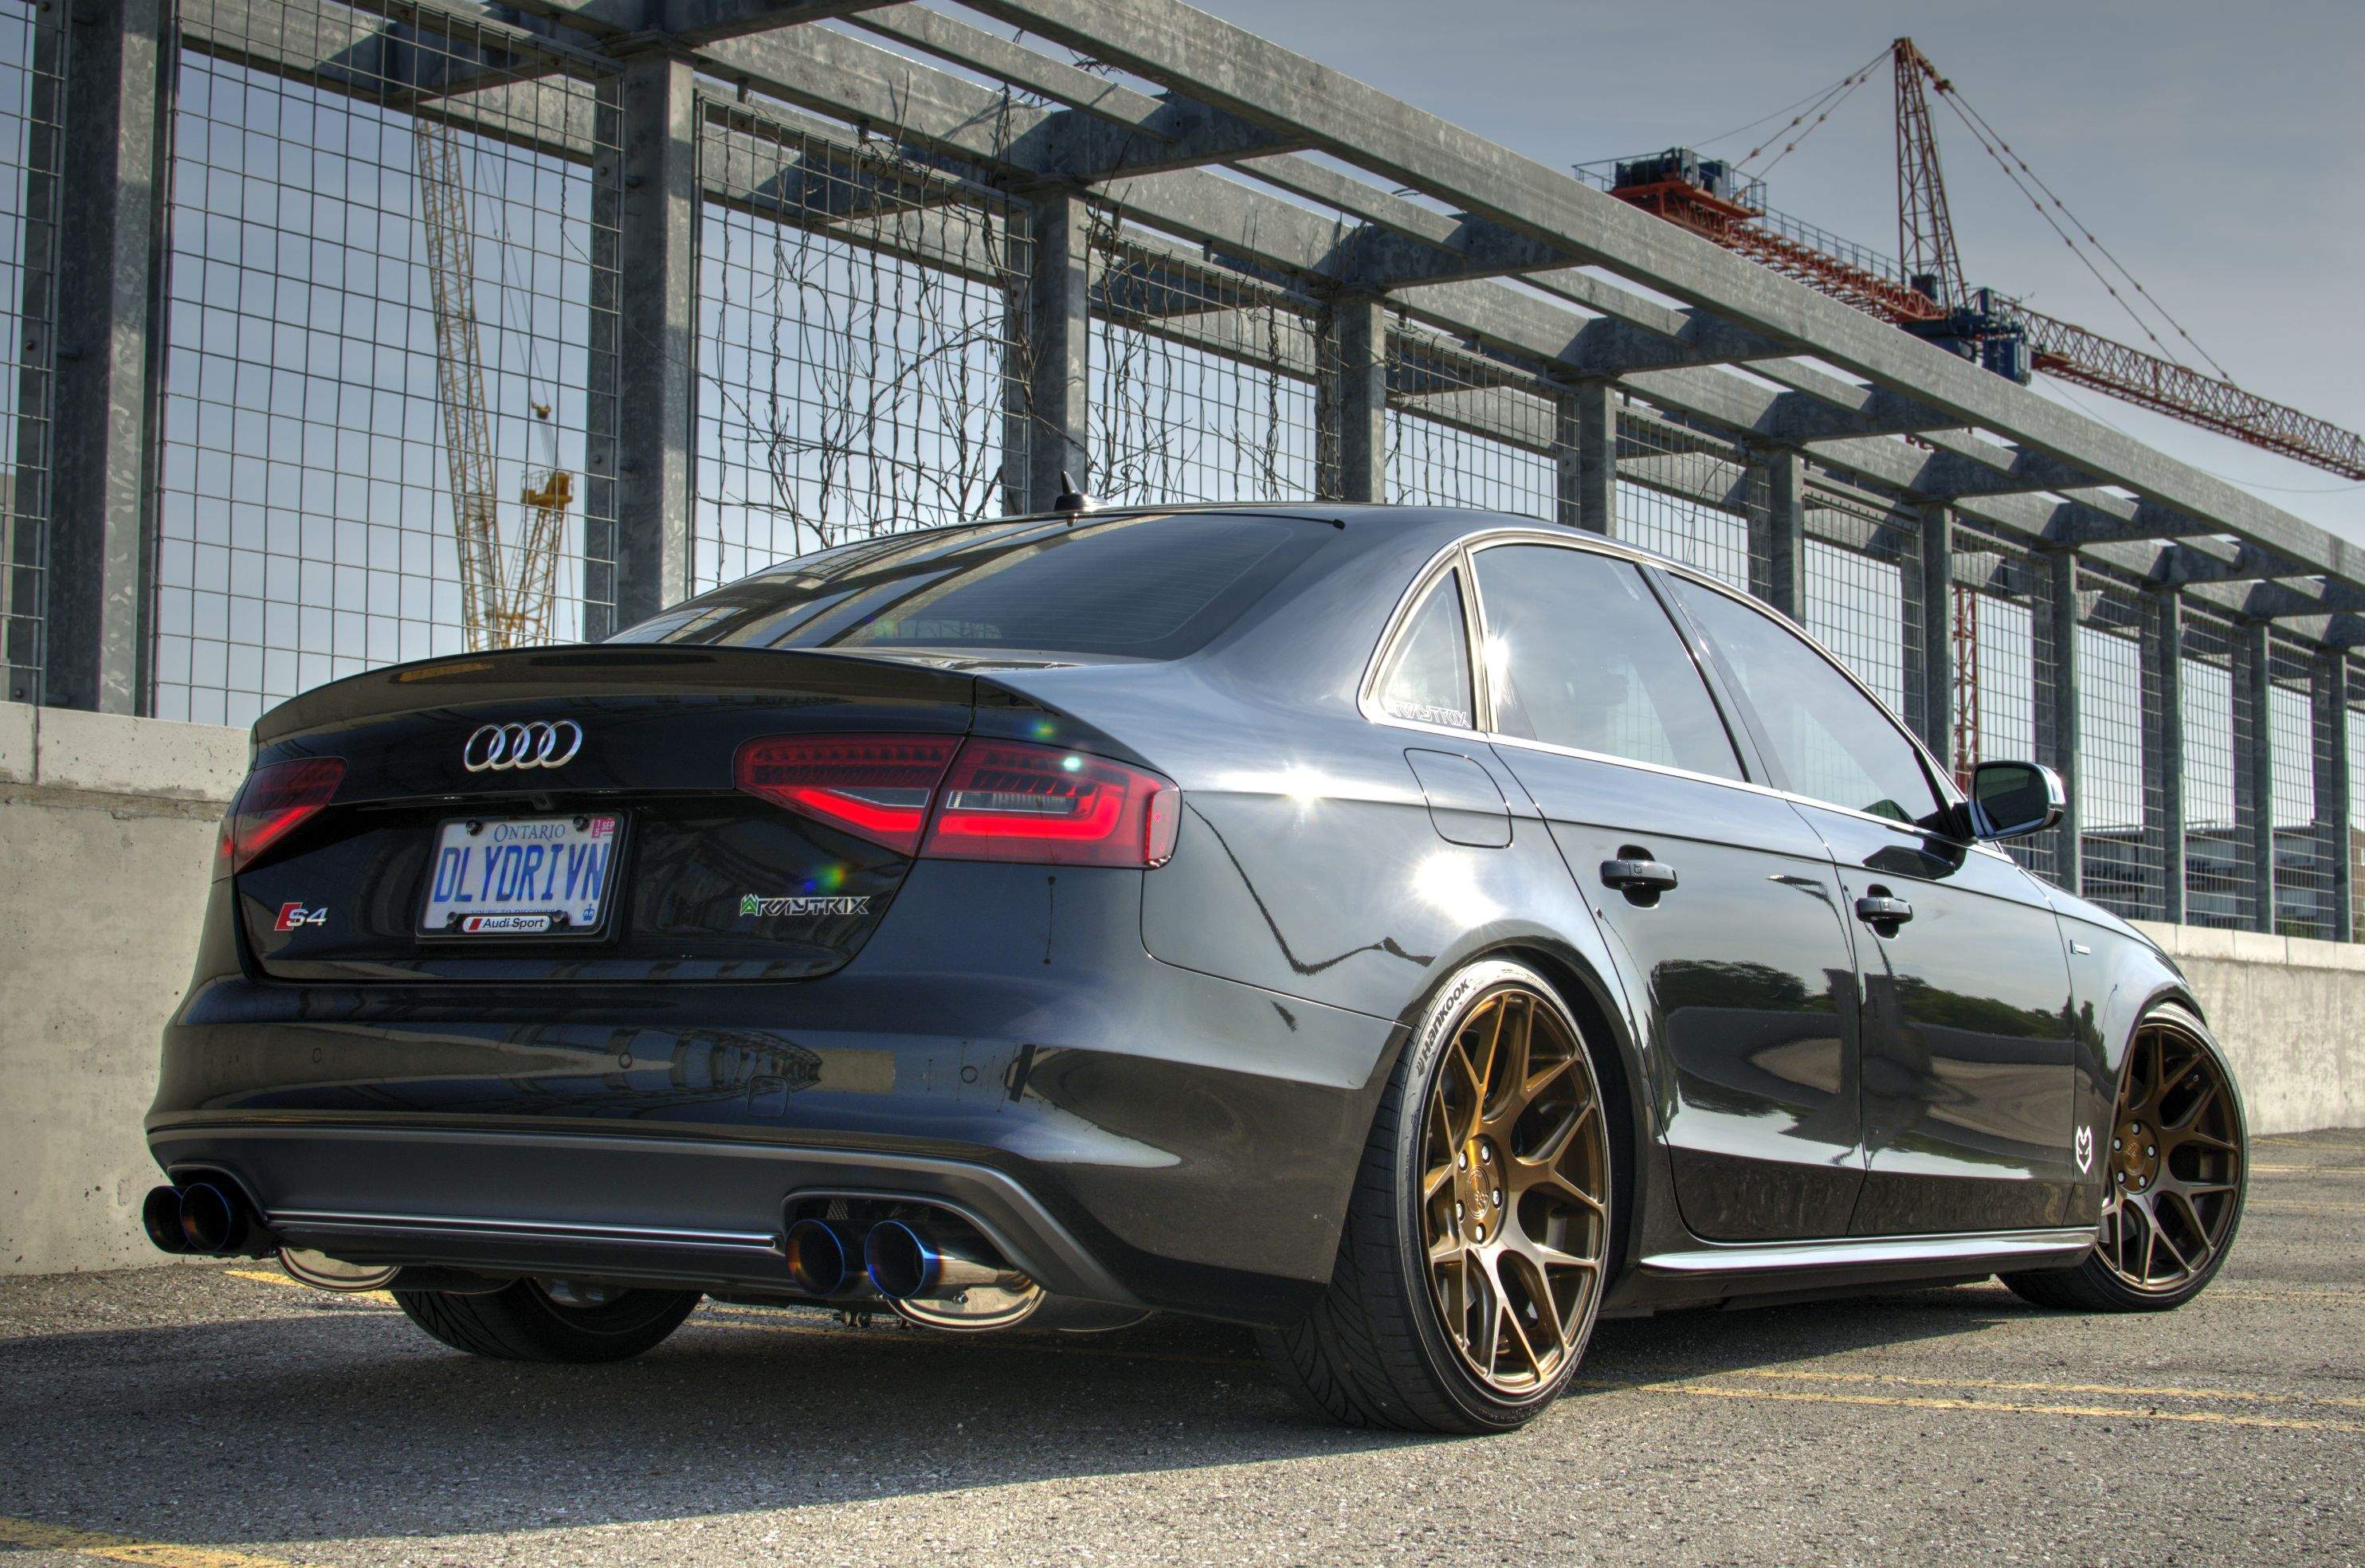 Audi A4 B8 Sedan Avant Armytrix Exhaust Tuning Review Price